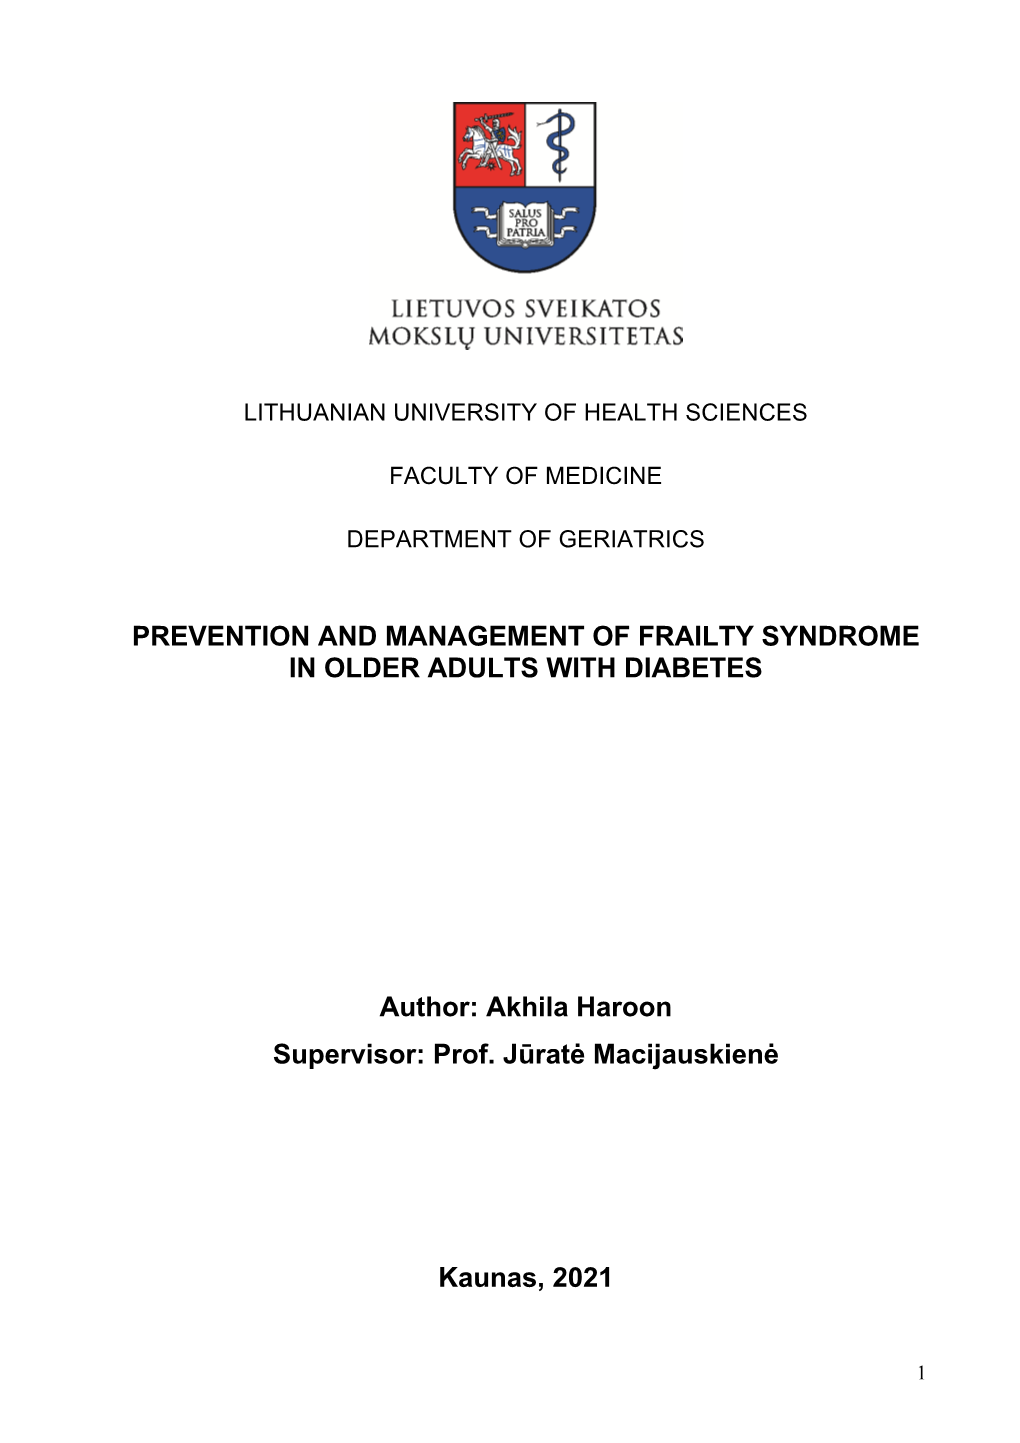 PREVENTION and MANAGEMENT of FRAILTY SYNDROME in OLDER ADULTS with DIABETES Author